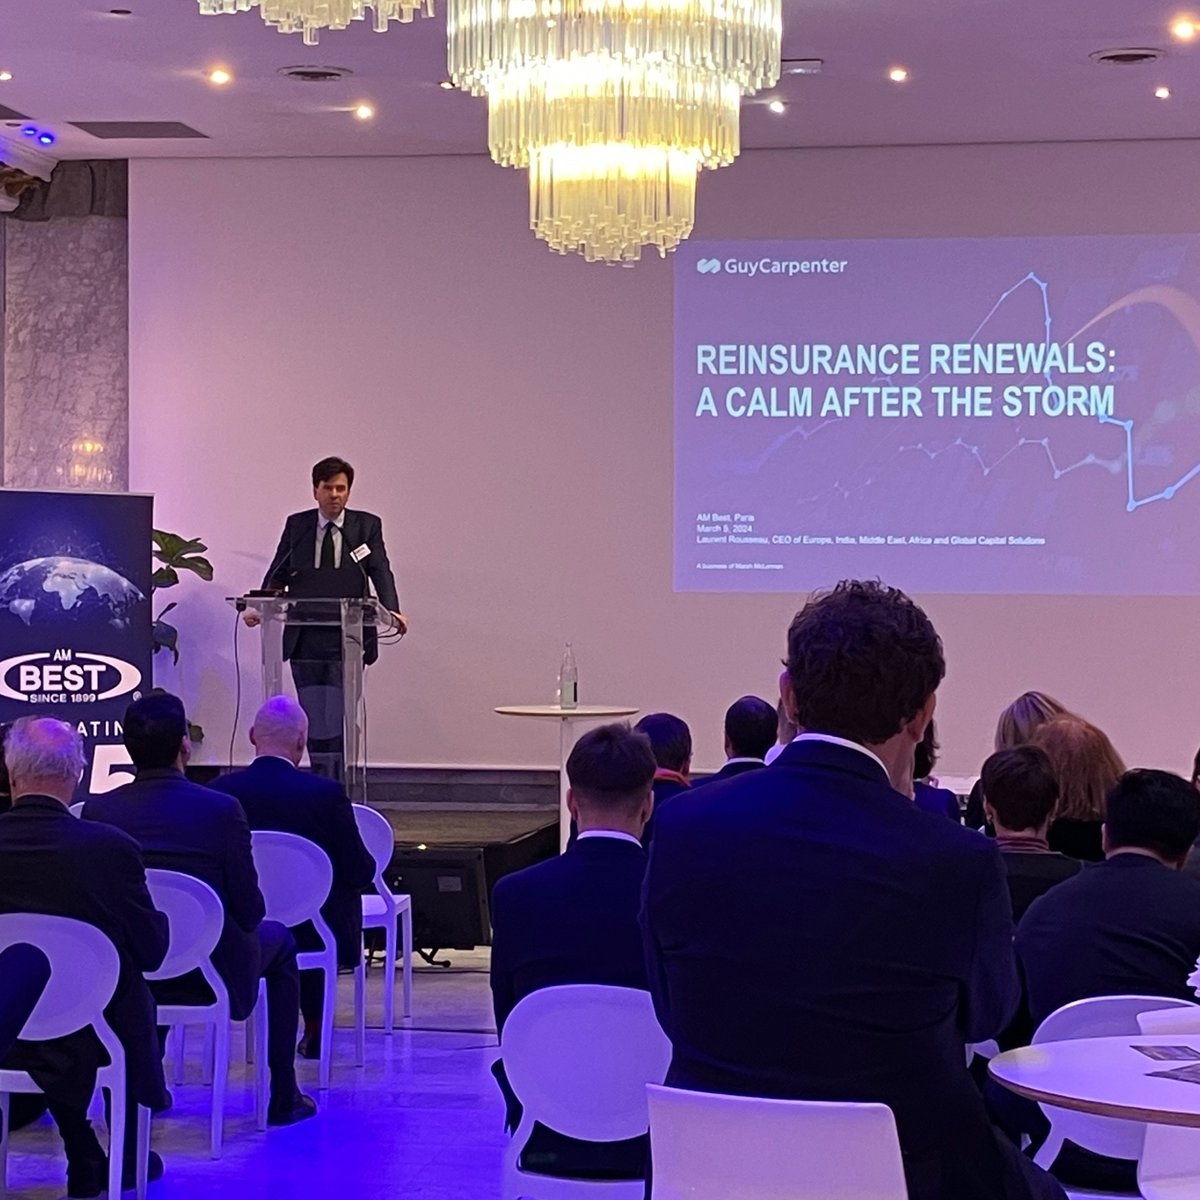 Merci to all who attended AM Best's Insurance Market Briefing in Paris this morning! We appreciated the opportunity to meet and discuss with delegates from across the market segments! Looking forward to next year!
#insurance #reinsurance #cyberrisks #IFRS17 #assurance #France